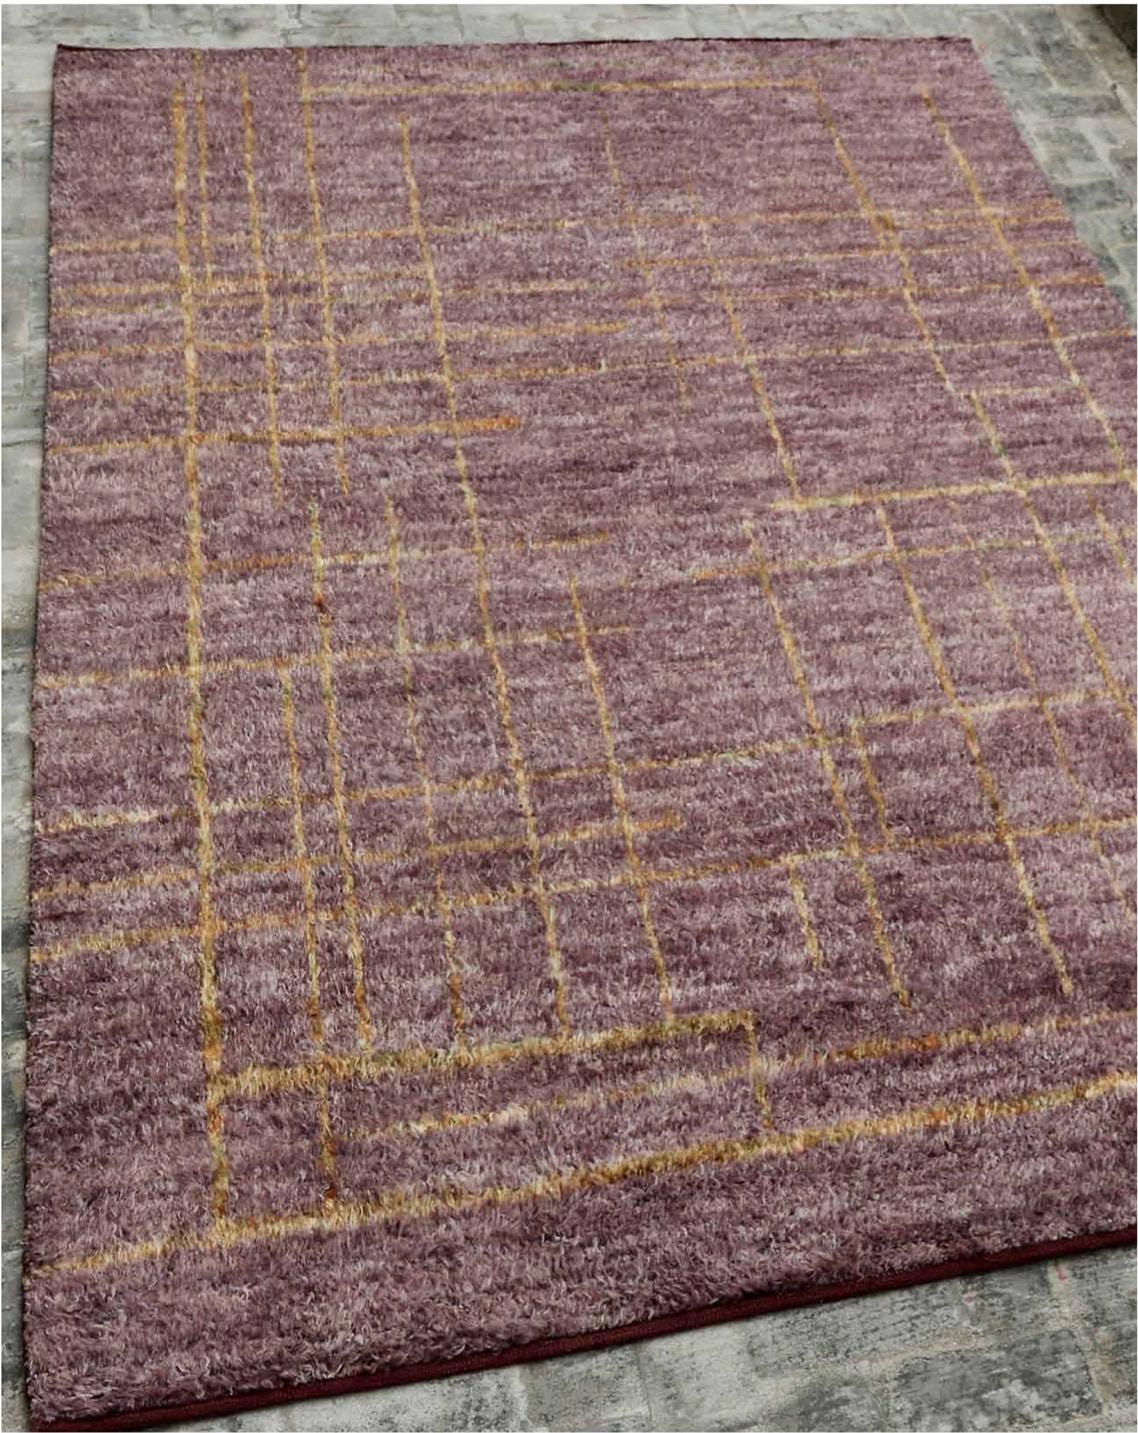 Nazmiyal Collection Geometric Modern Transitional Rug. Country of Origin: Pakistani Rugs. Circa date: Modern. Size: 5 ft 10 in x 9 ft 5 in (1.78 m x 2.87 m)



